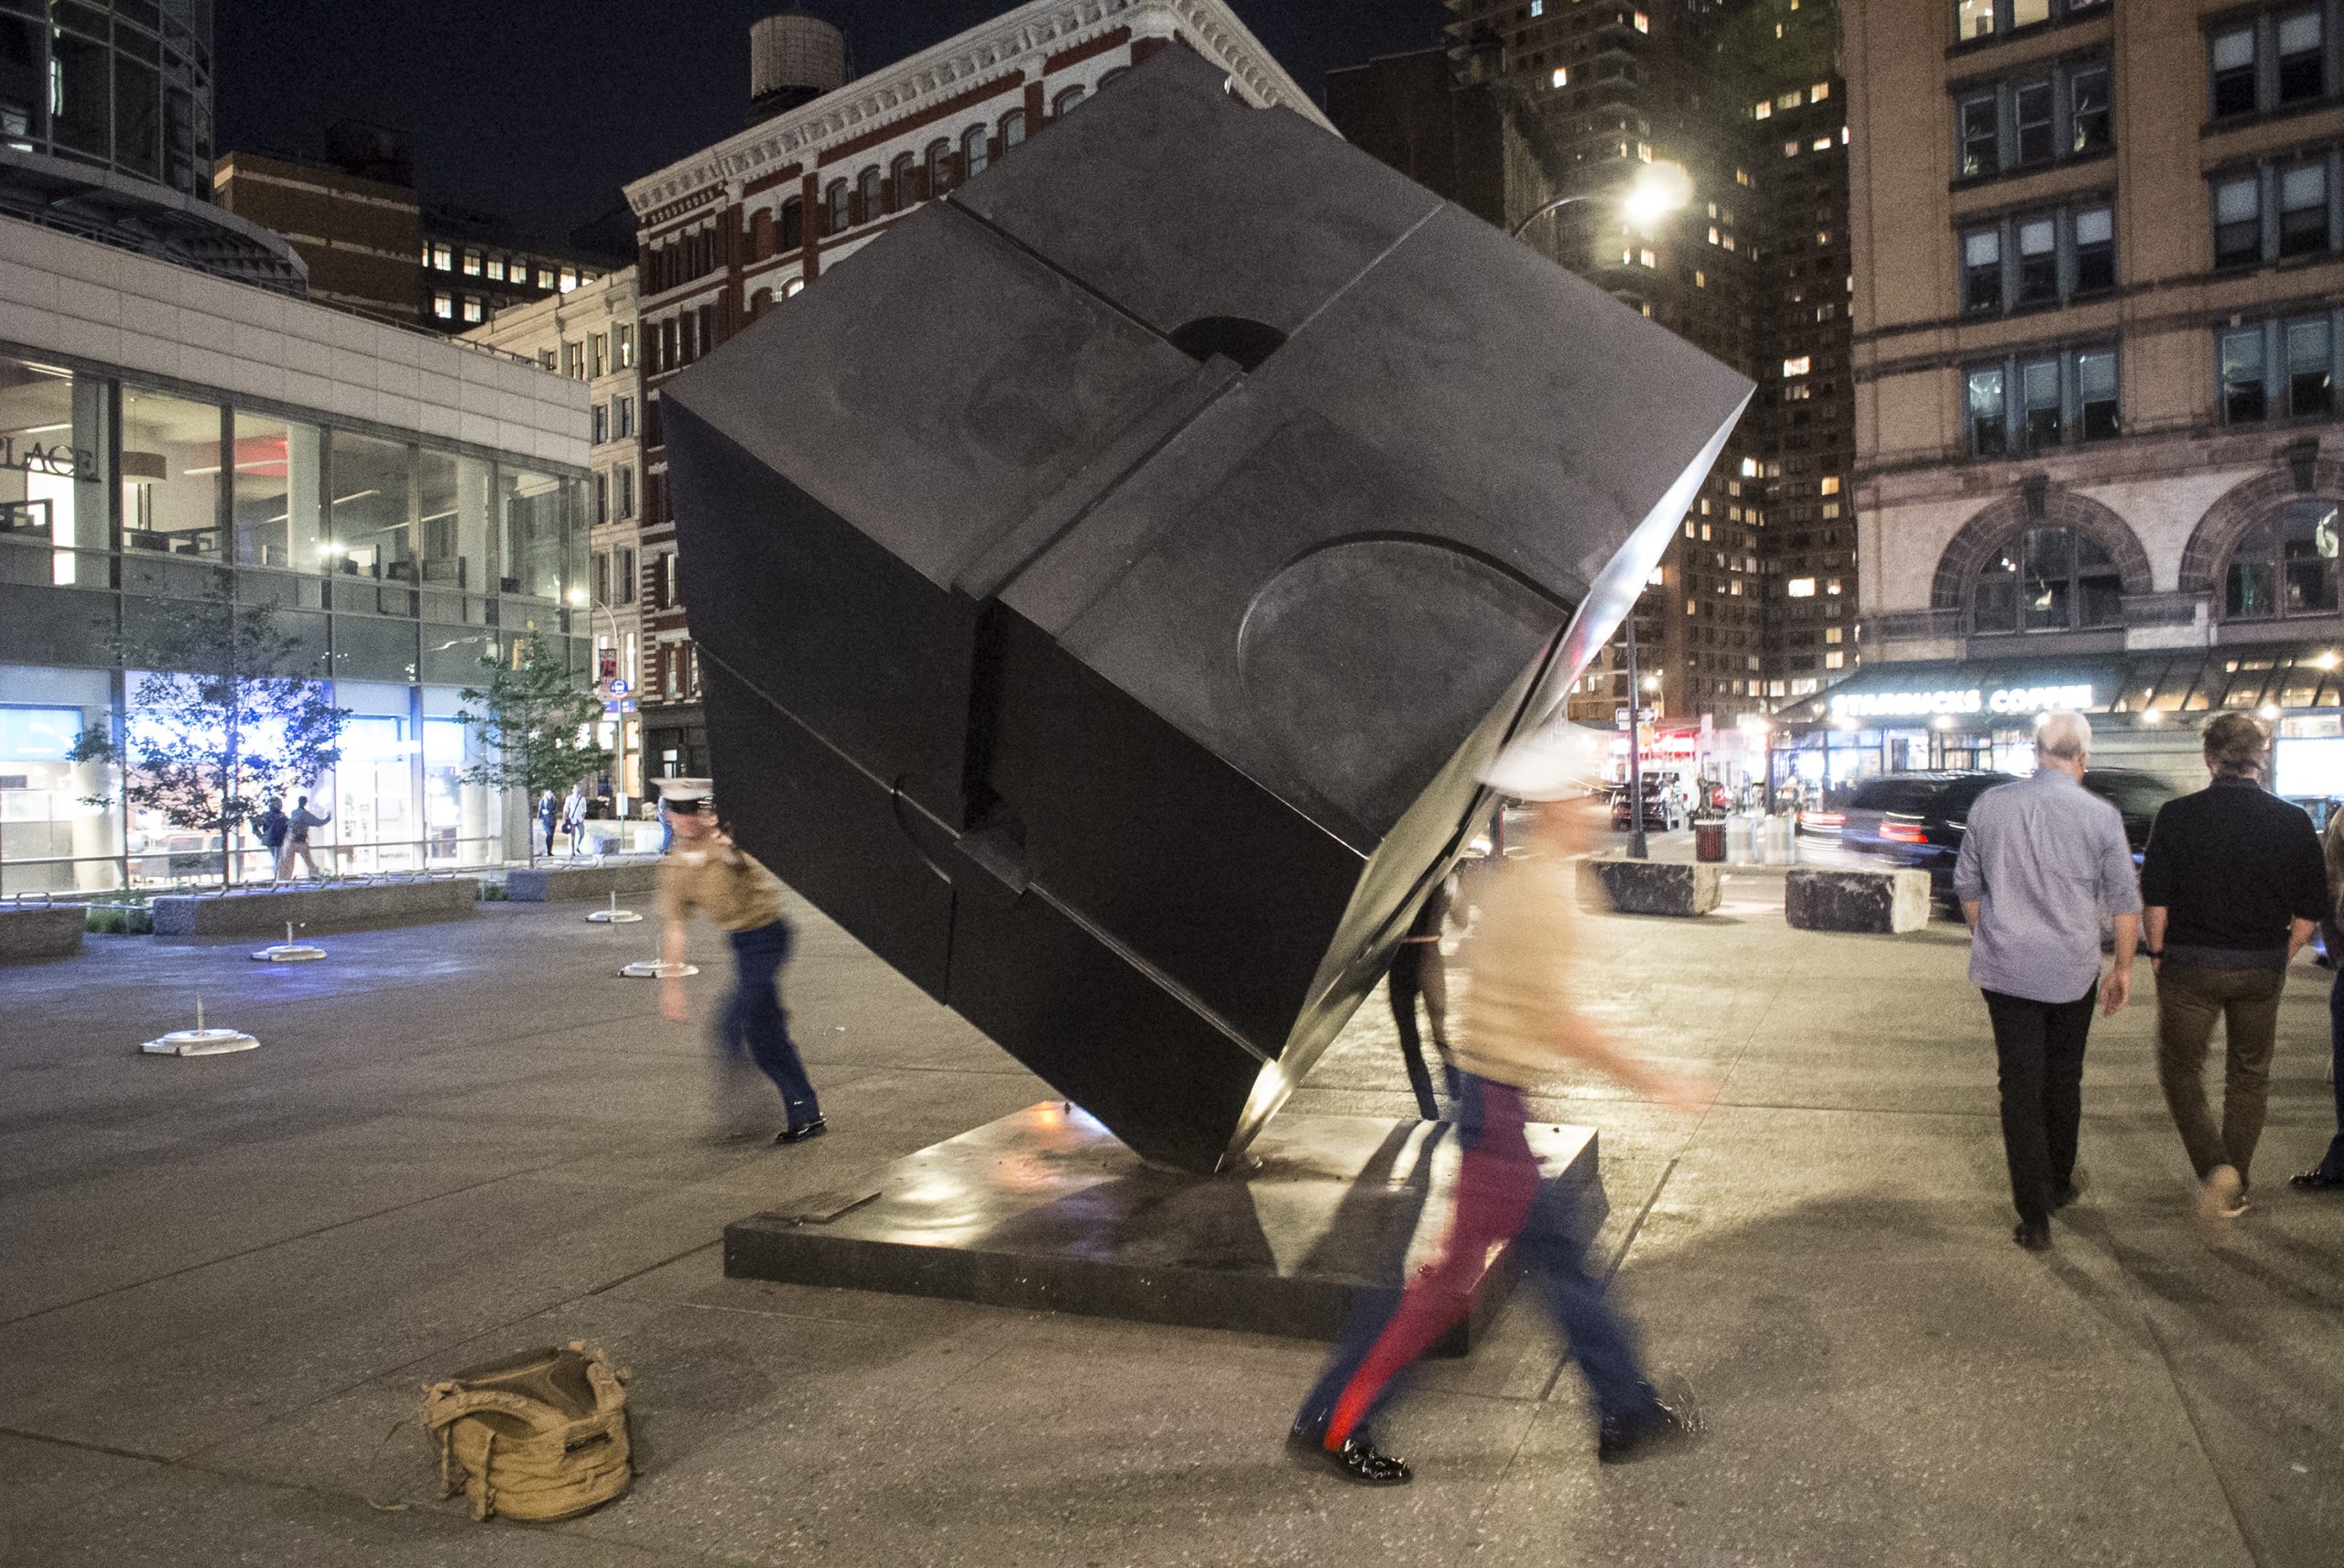 The Beloved Astor Place Cube Finally Returns!